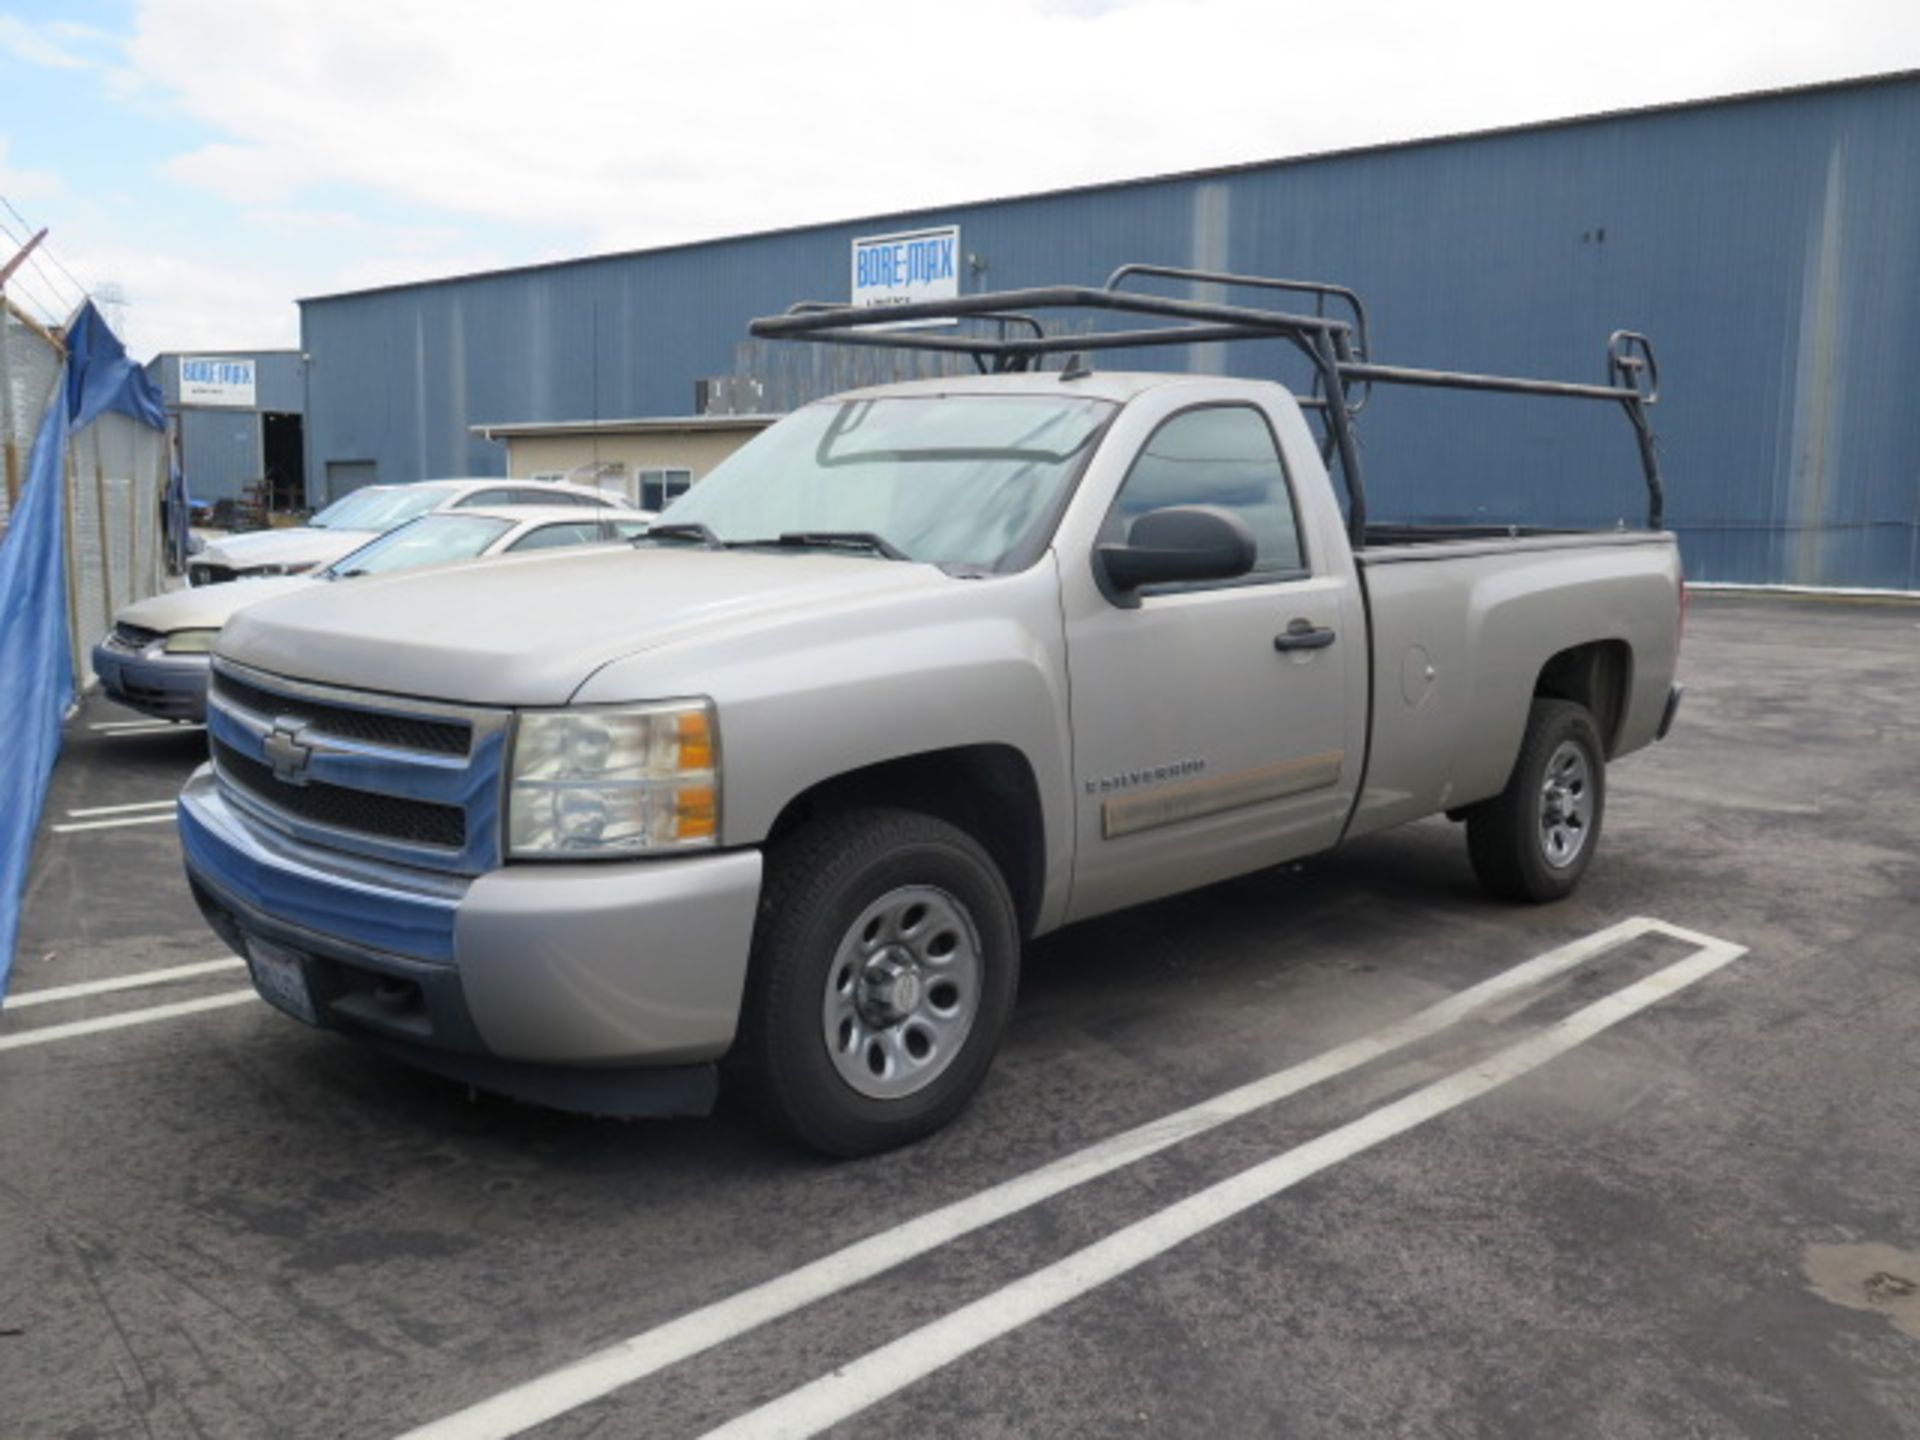 2007 Chevrolet Silverado LT Pickup Truck Lisc# 8M41606 w/ Gas Engine, Automatic Trans, SOLD AS IS